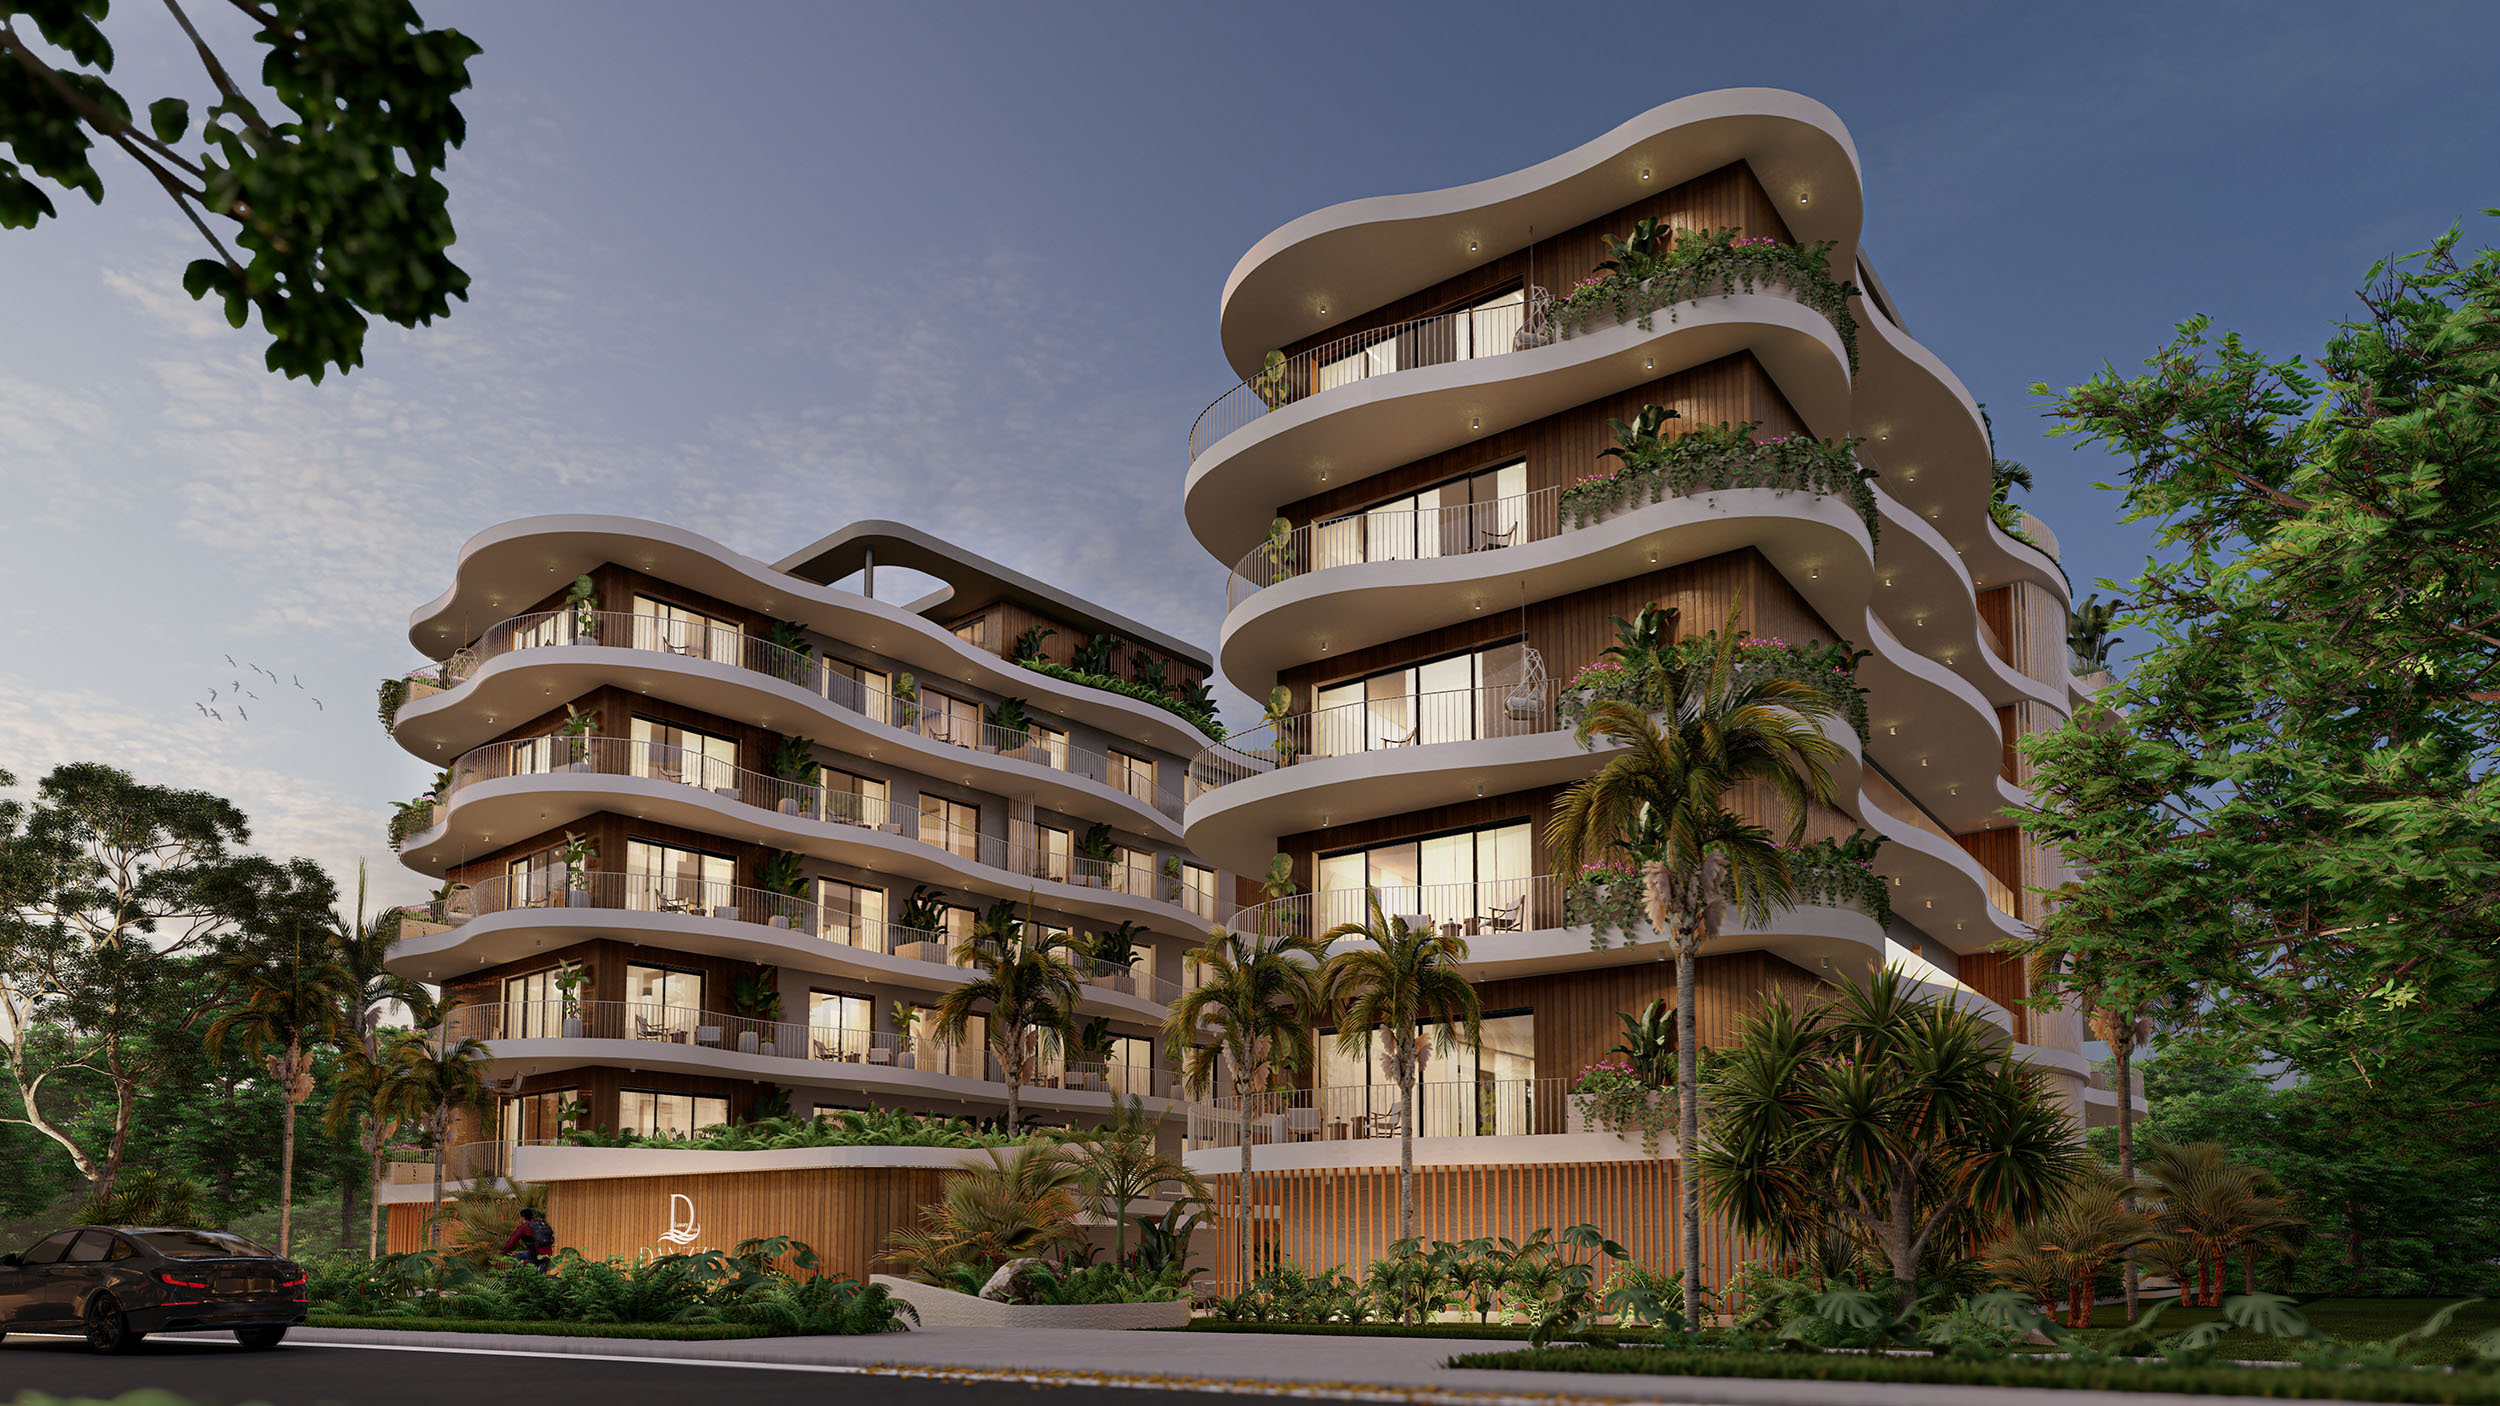 Danzza Luxury Residence, cap cana out side view